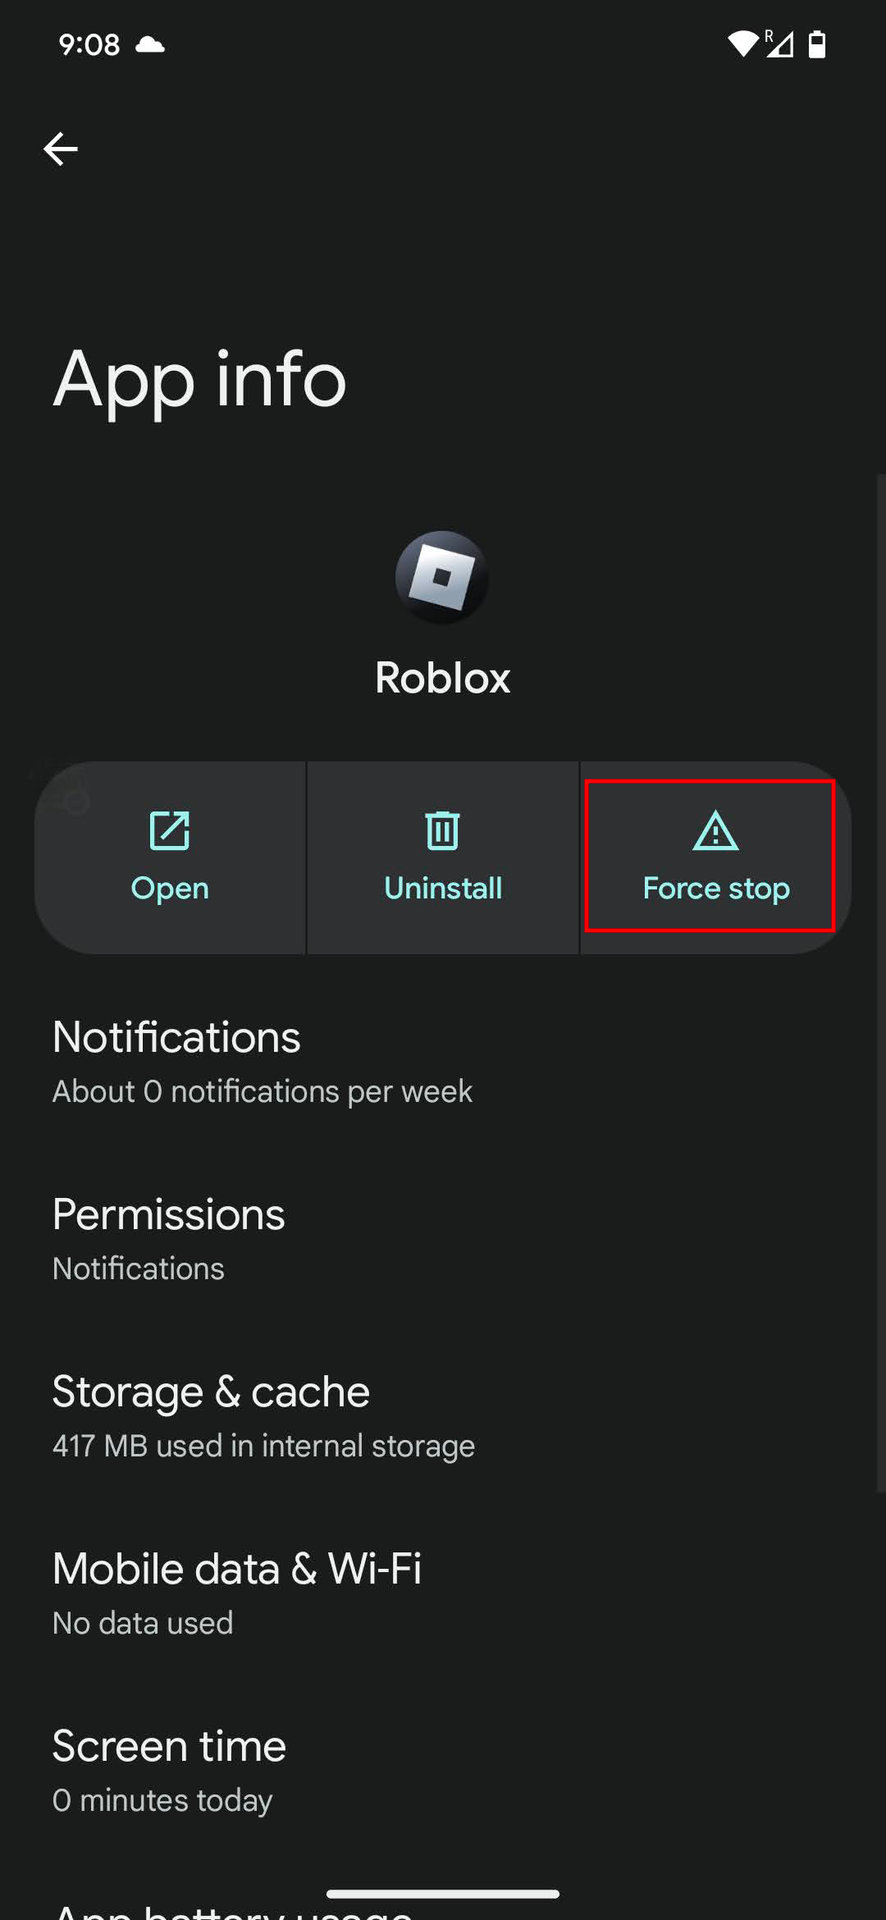 Roblox Not Launching? How to Force it to Open